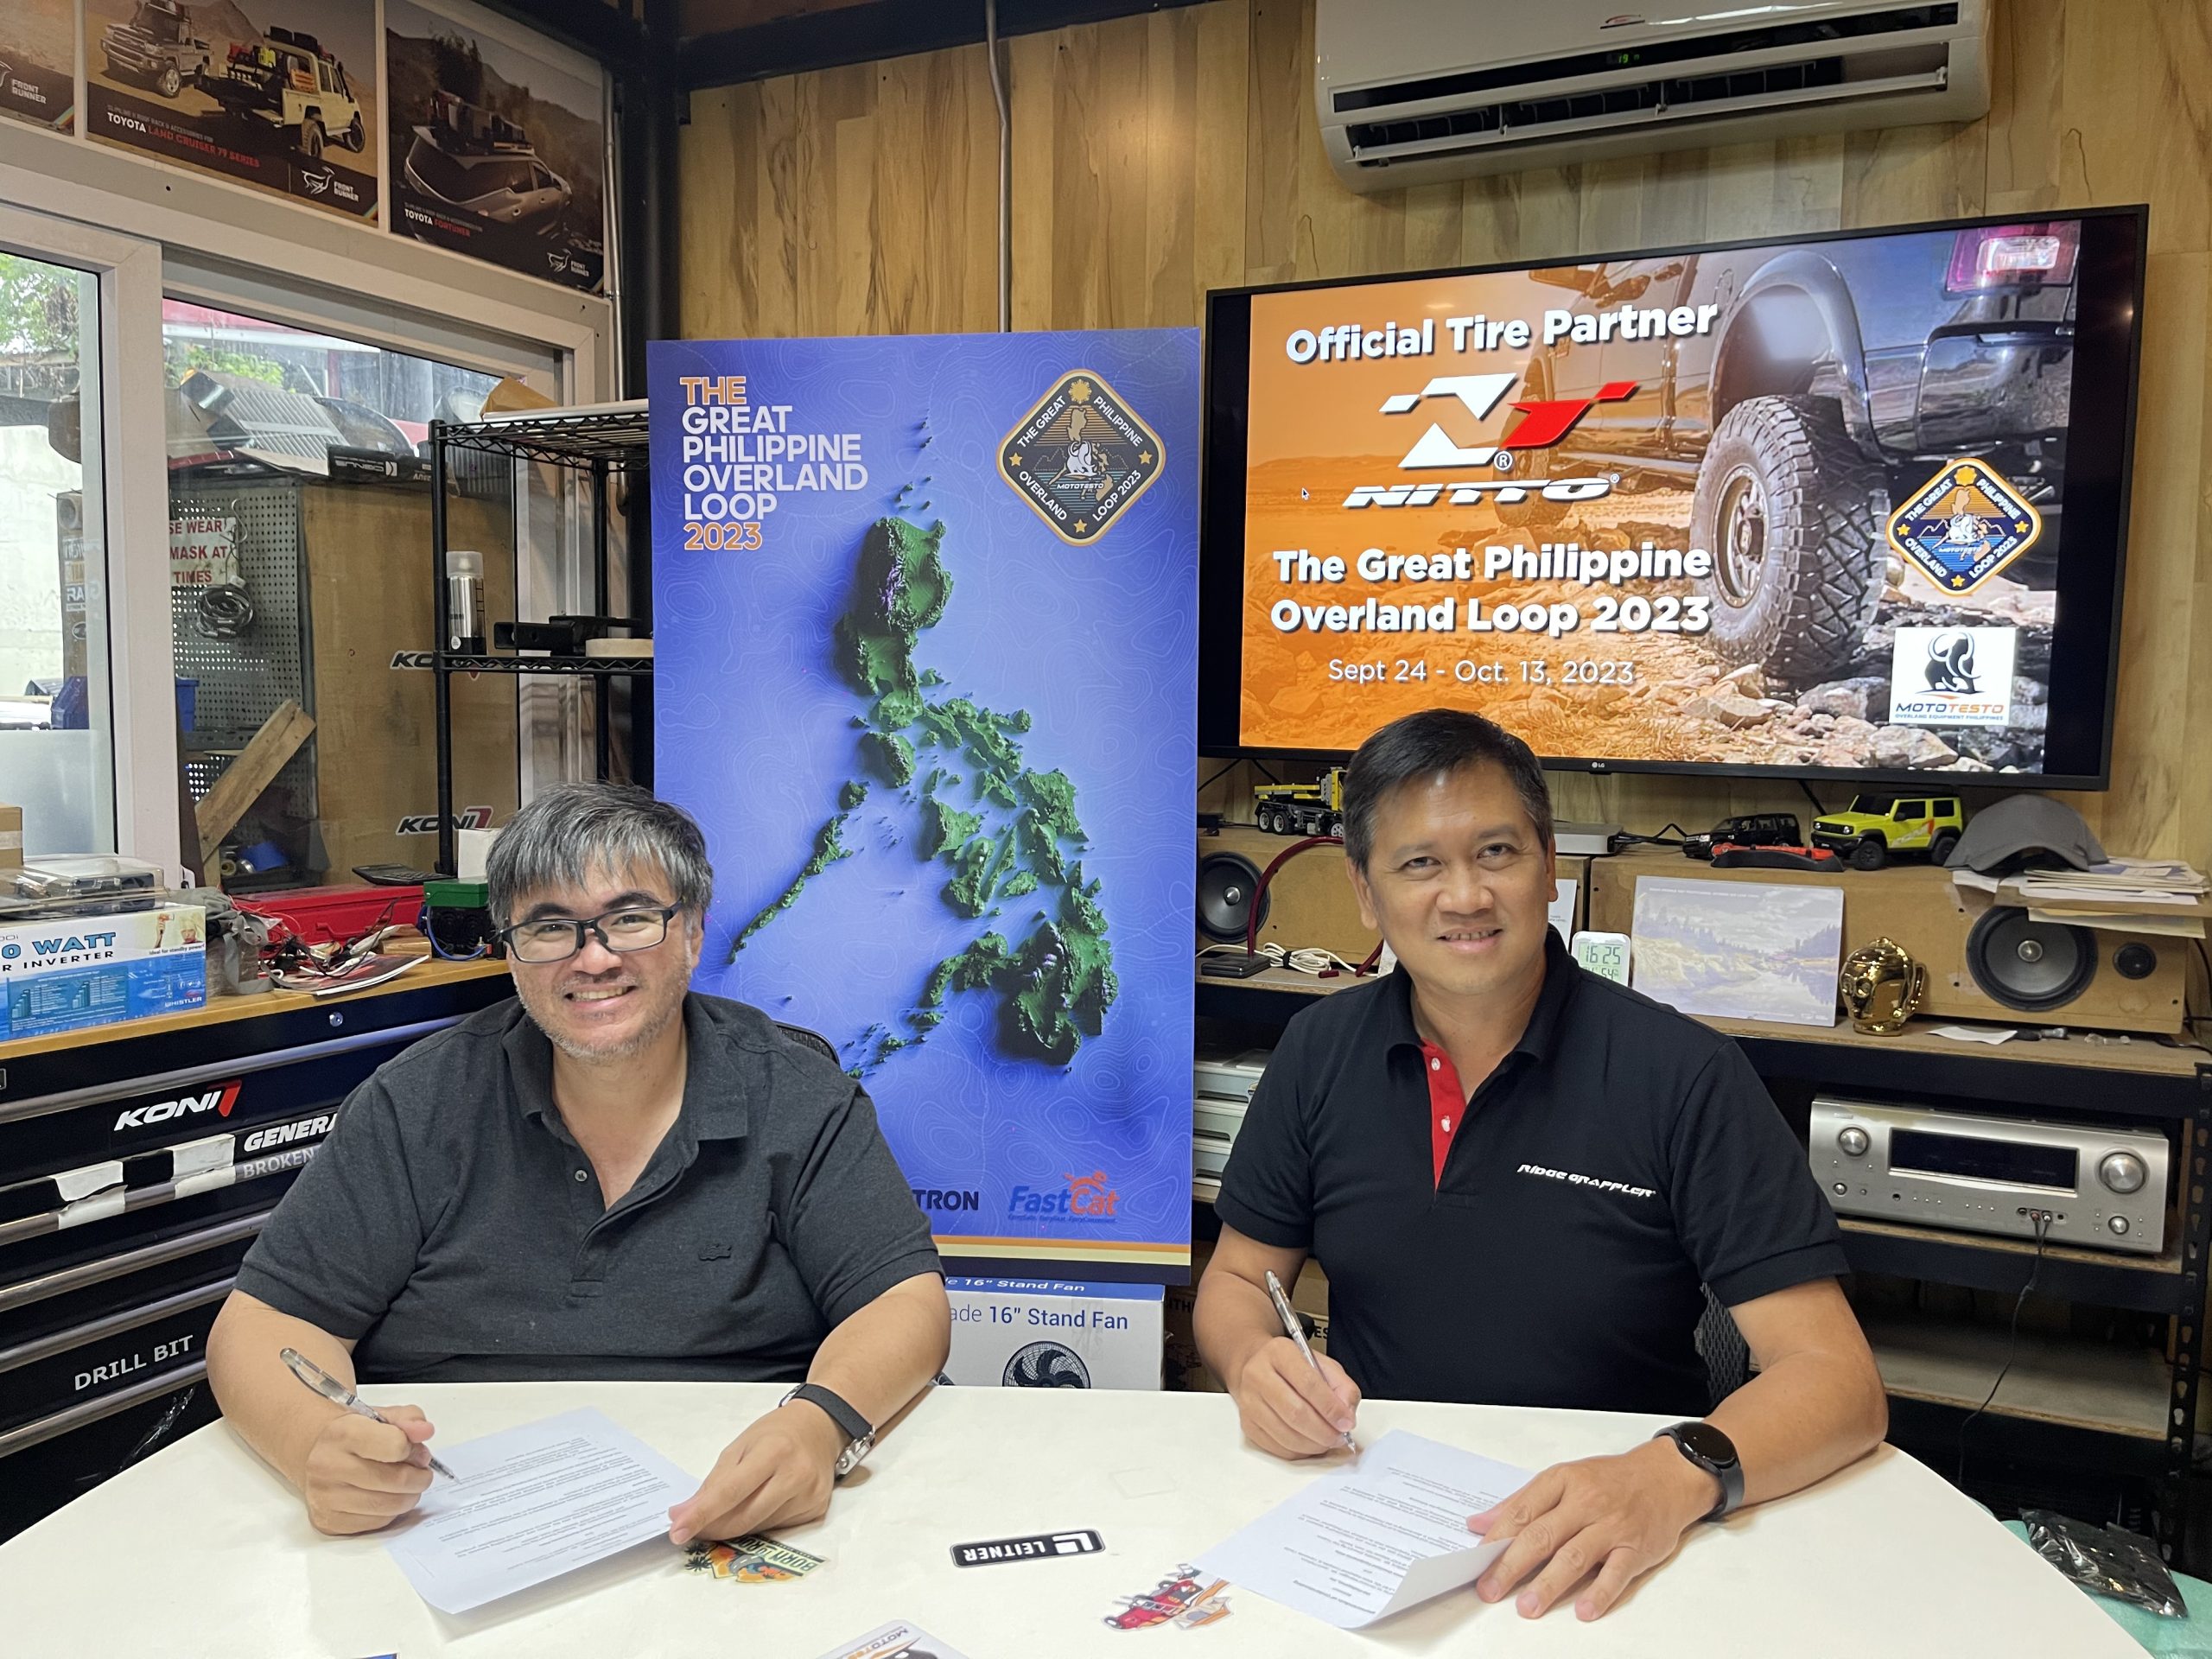 Nitto Tires PH is the official tire partner of the Great Philippine Overland Expo